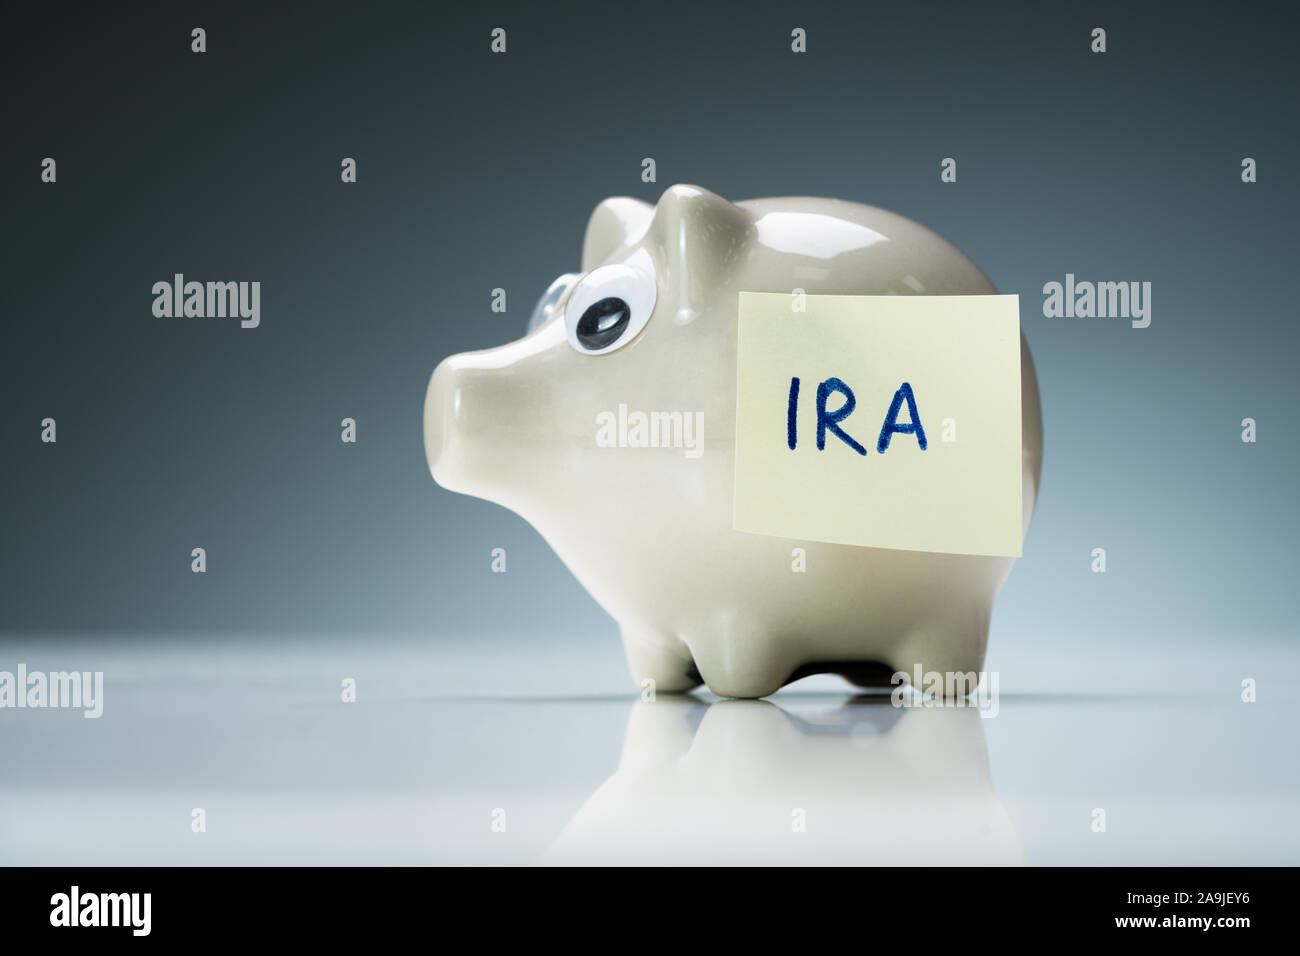 A White Piggy Bank On A Reflective Desk With Ira Text On Adhesive Note Stock Photo